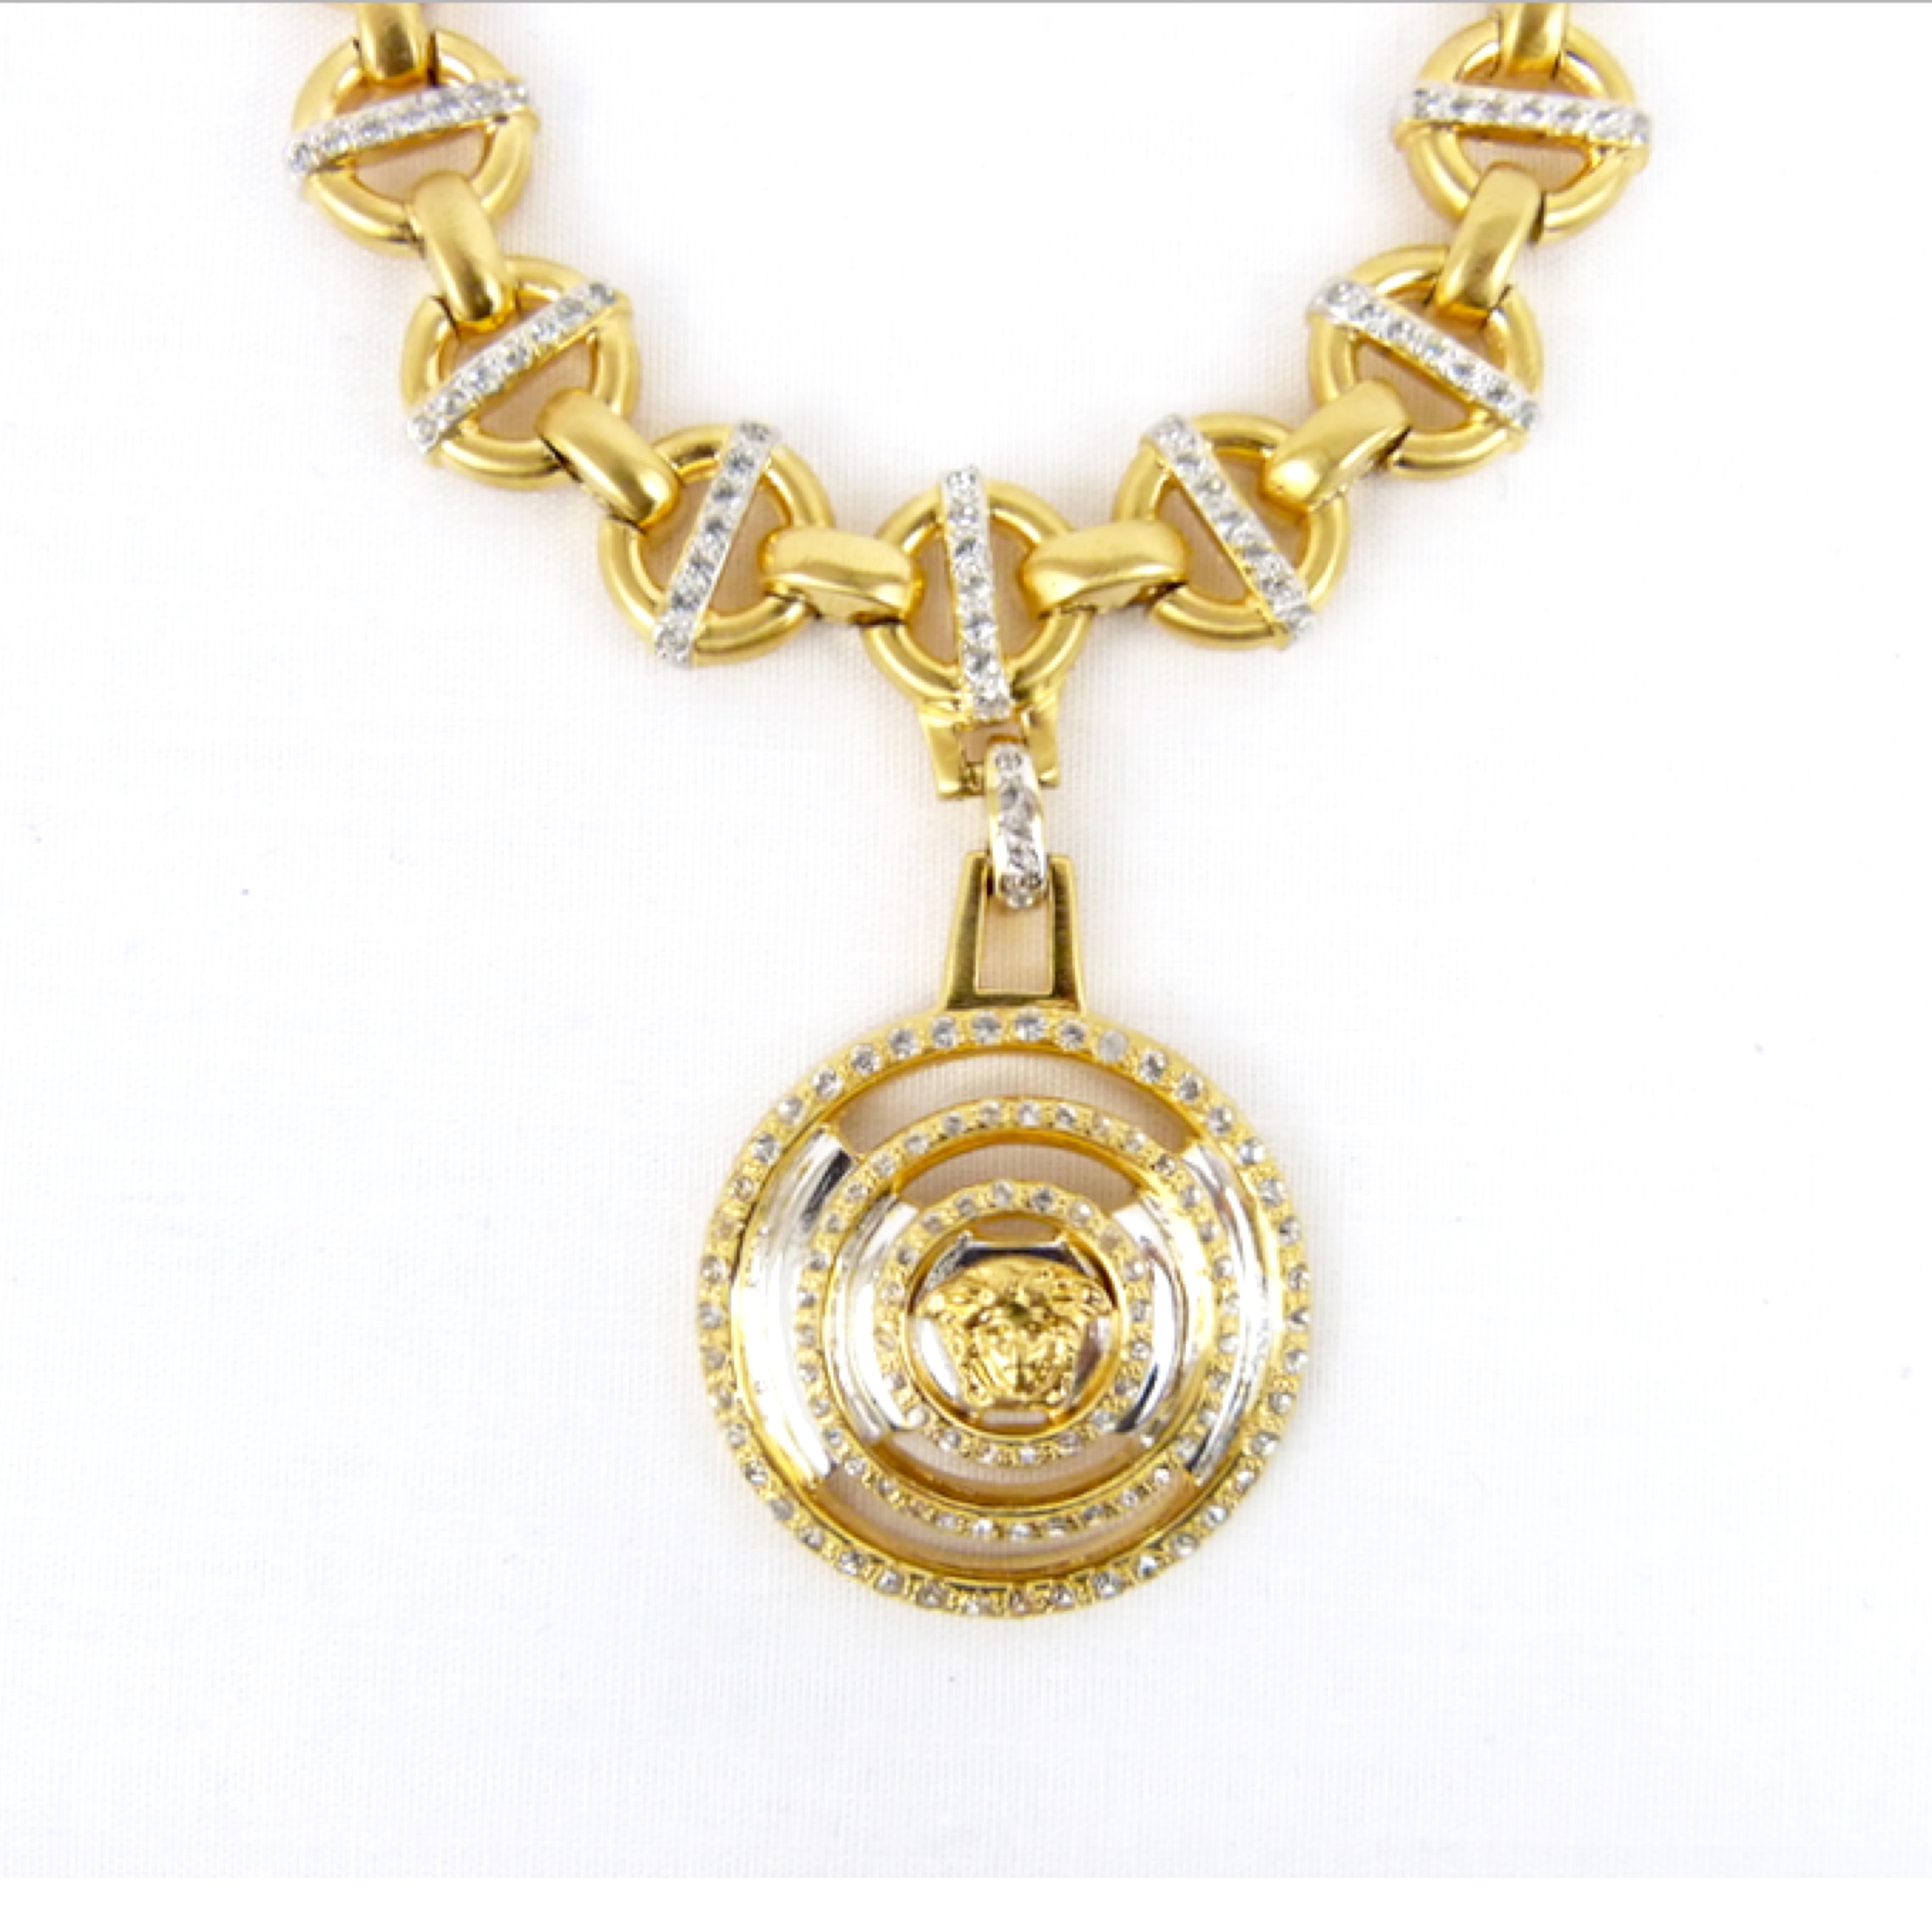 This rare Gianni Versace necklace is in true style of the designer himself. The 1990's gold necklace featured in on of his catwalks has a beautiful circle interlocking chain. The large pendent has his iconic medusa head which is surrounded by silver